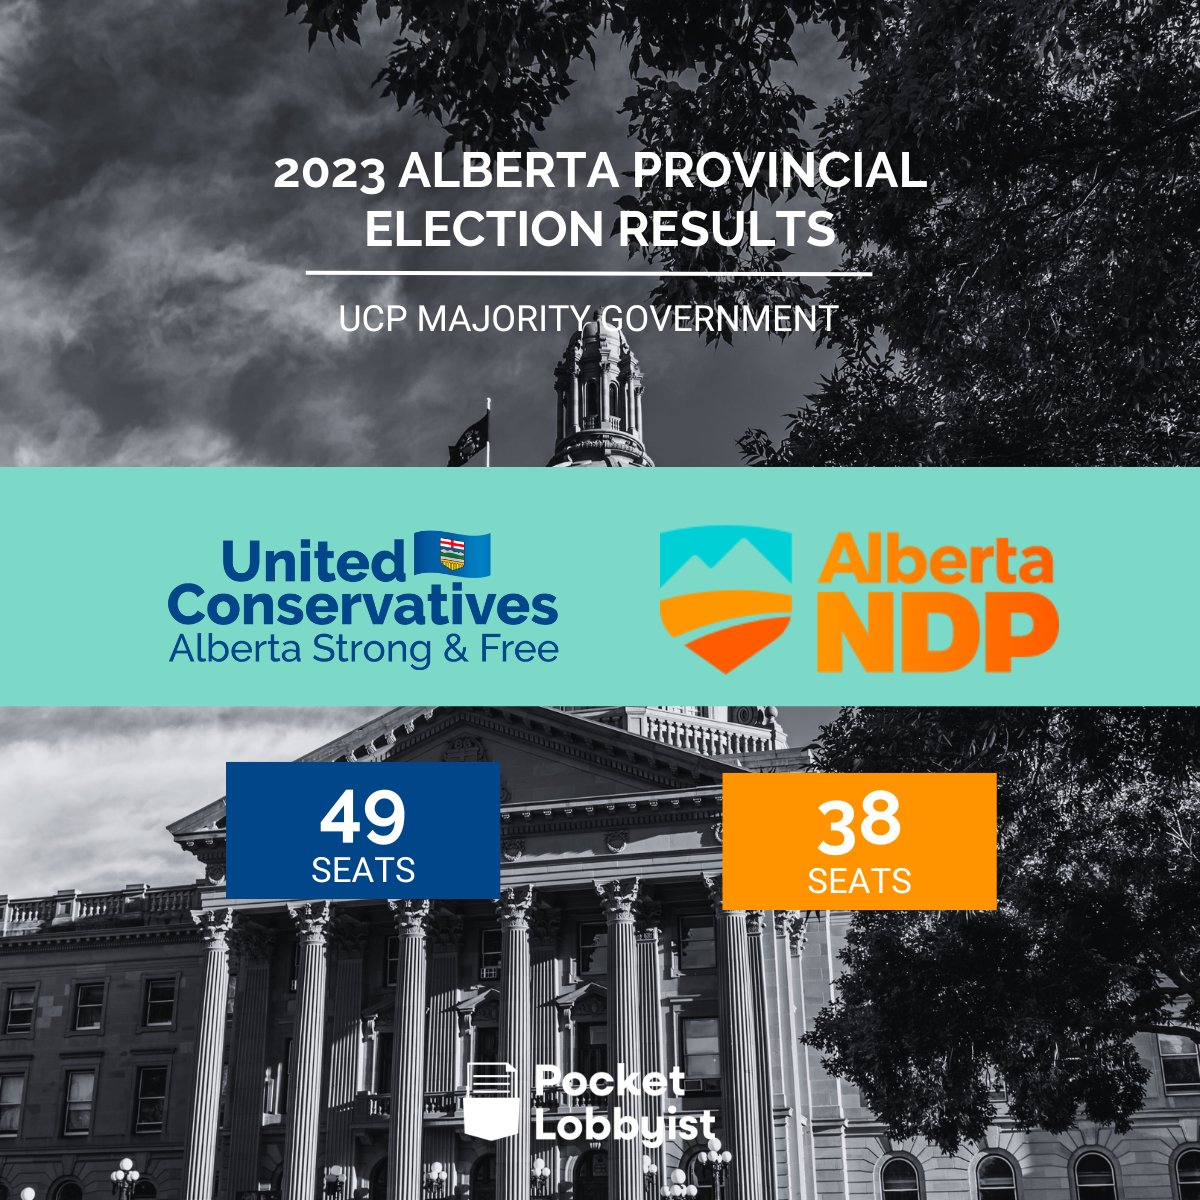 Here are the unofficial results for Alberta's 31st Legislature following the 2023 provincial election on May 29:
🔹 @Alberta_UCP (Majority): 49 Seats
🔸 @albertaNDP: 38 Seats

Official Results will be released by Elections Alberta on June 8, 2023.